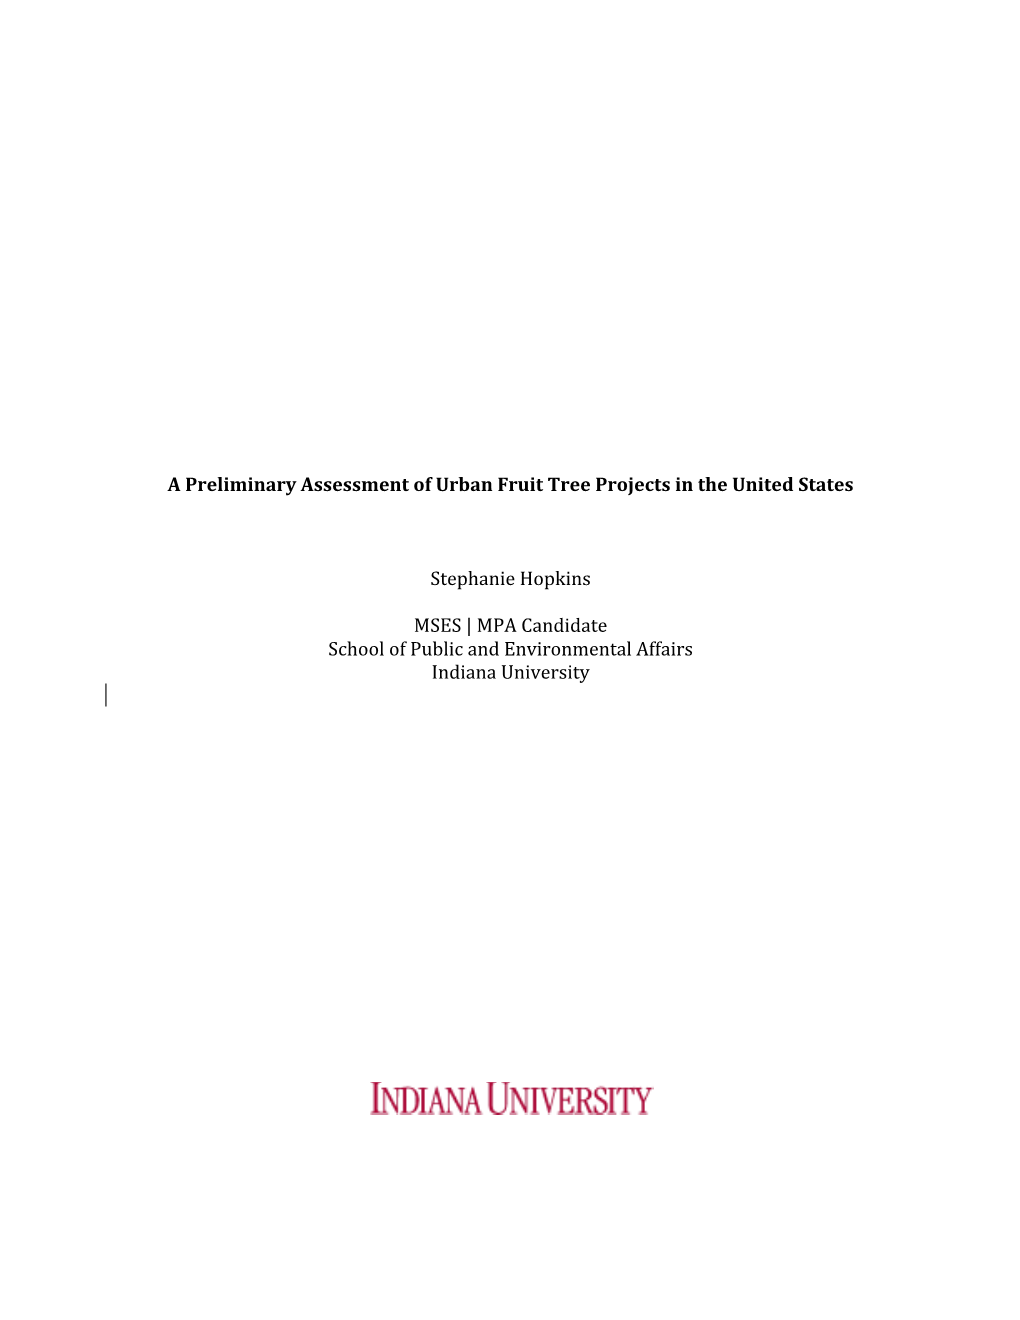 A Preliminary Assessment of Urban Fruit Tree Projects in the United States